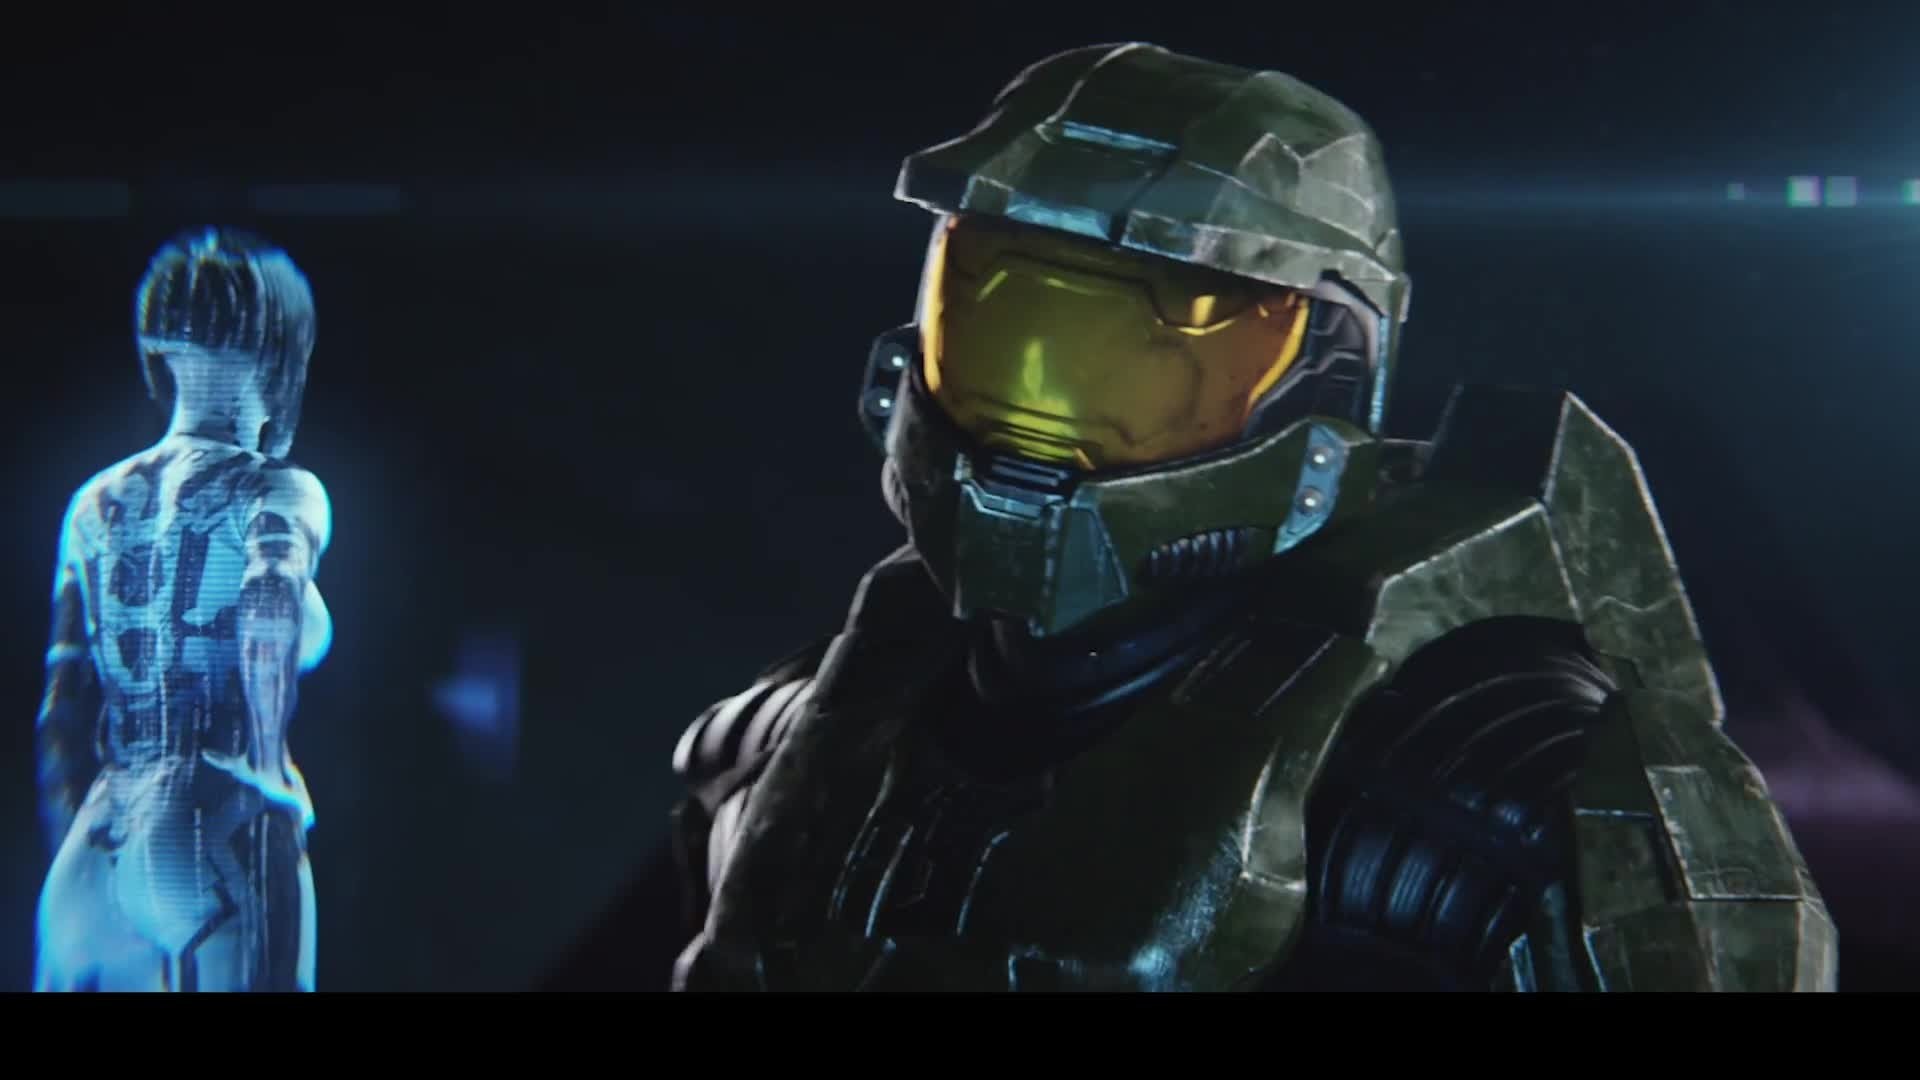 1920x1080 Halo 2 Anniversary Wallpapers hd Halo 2 Anniversary Official